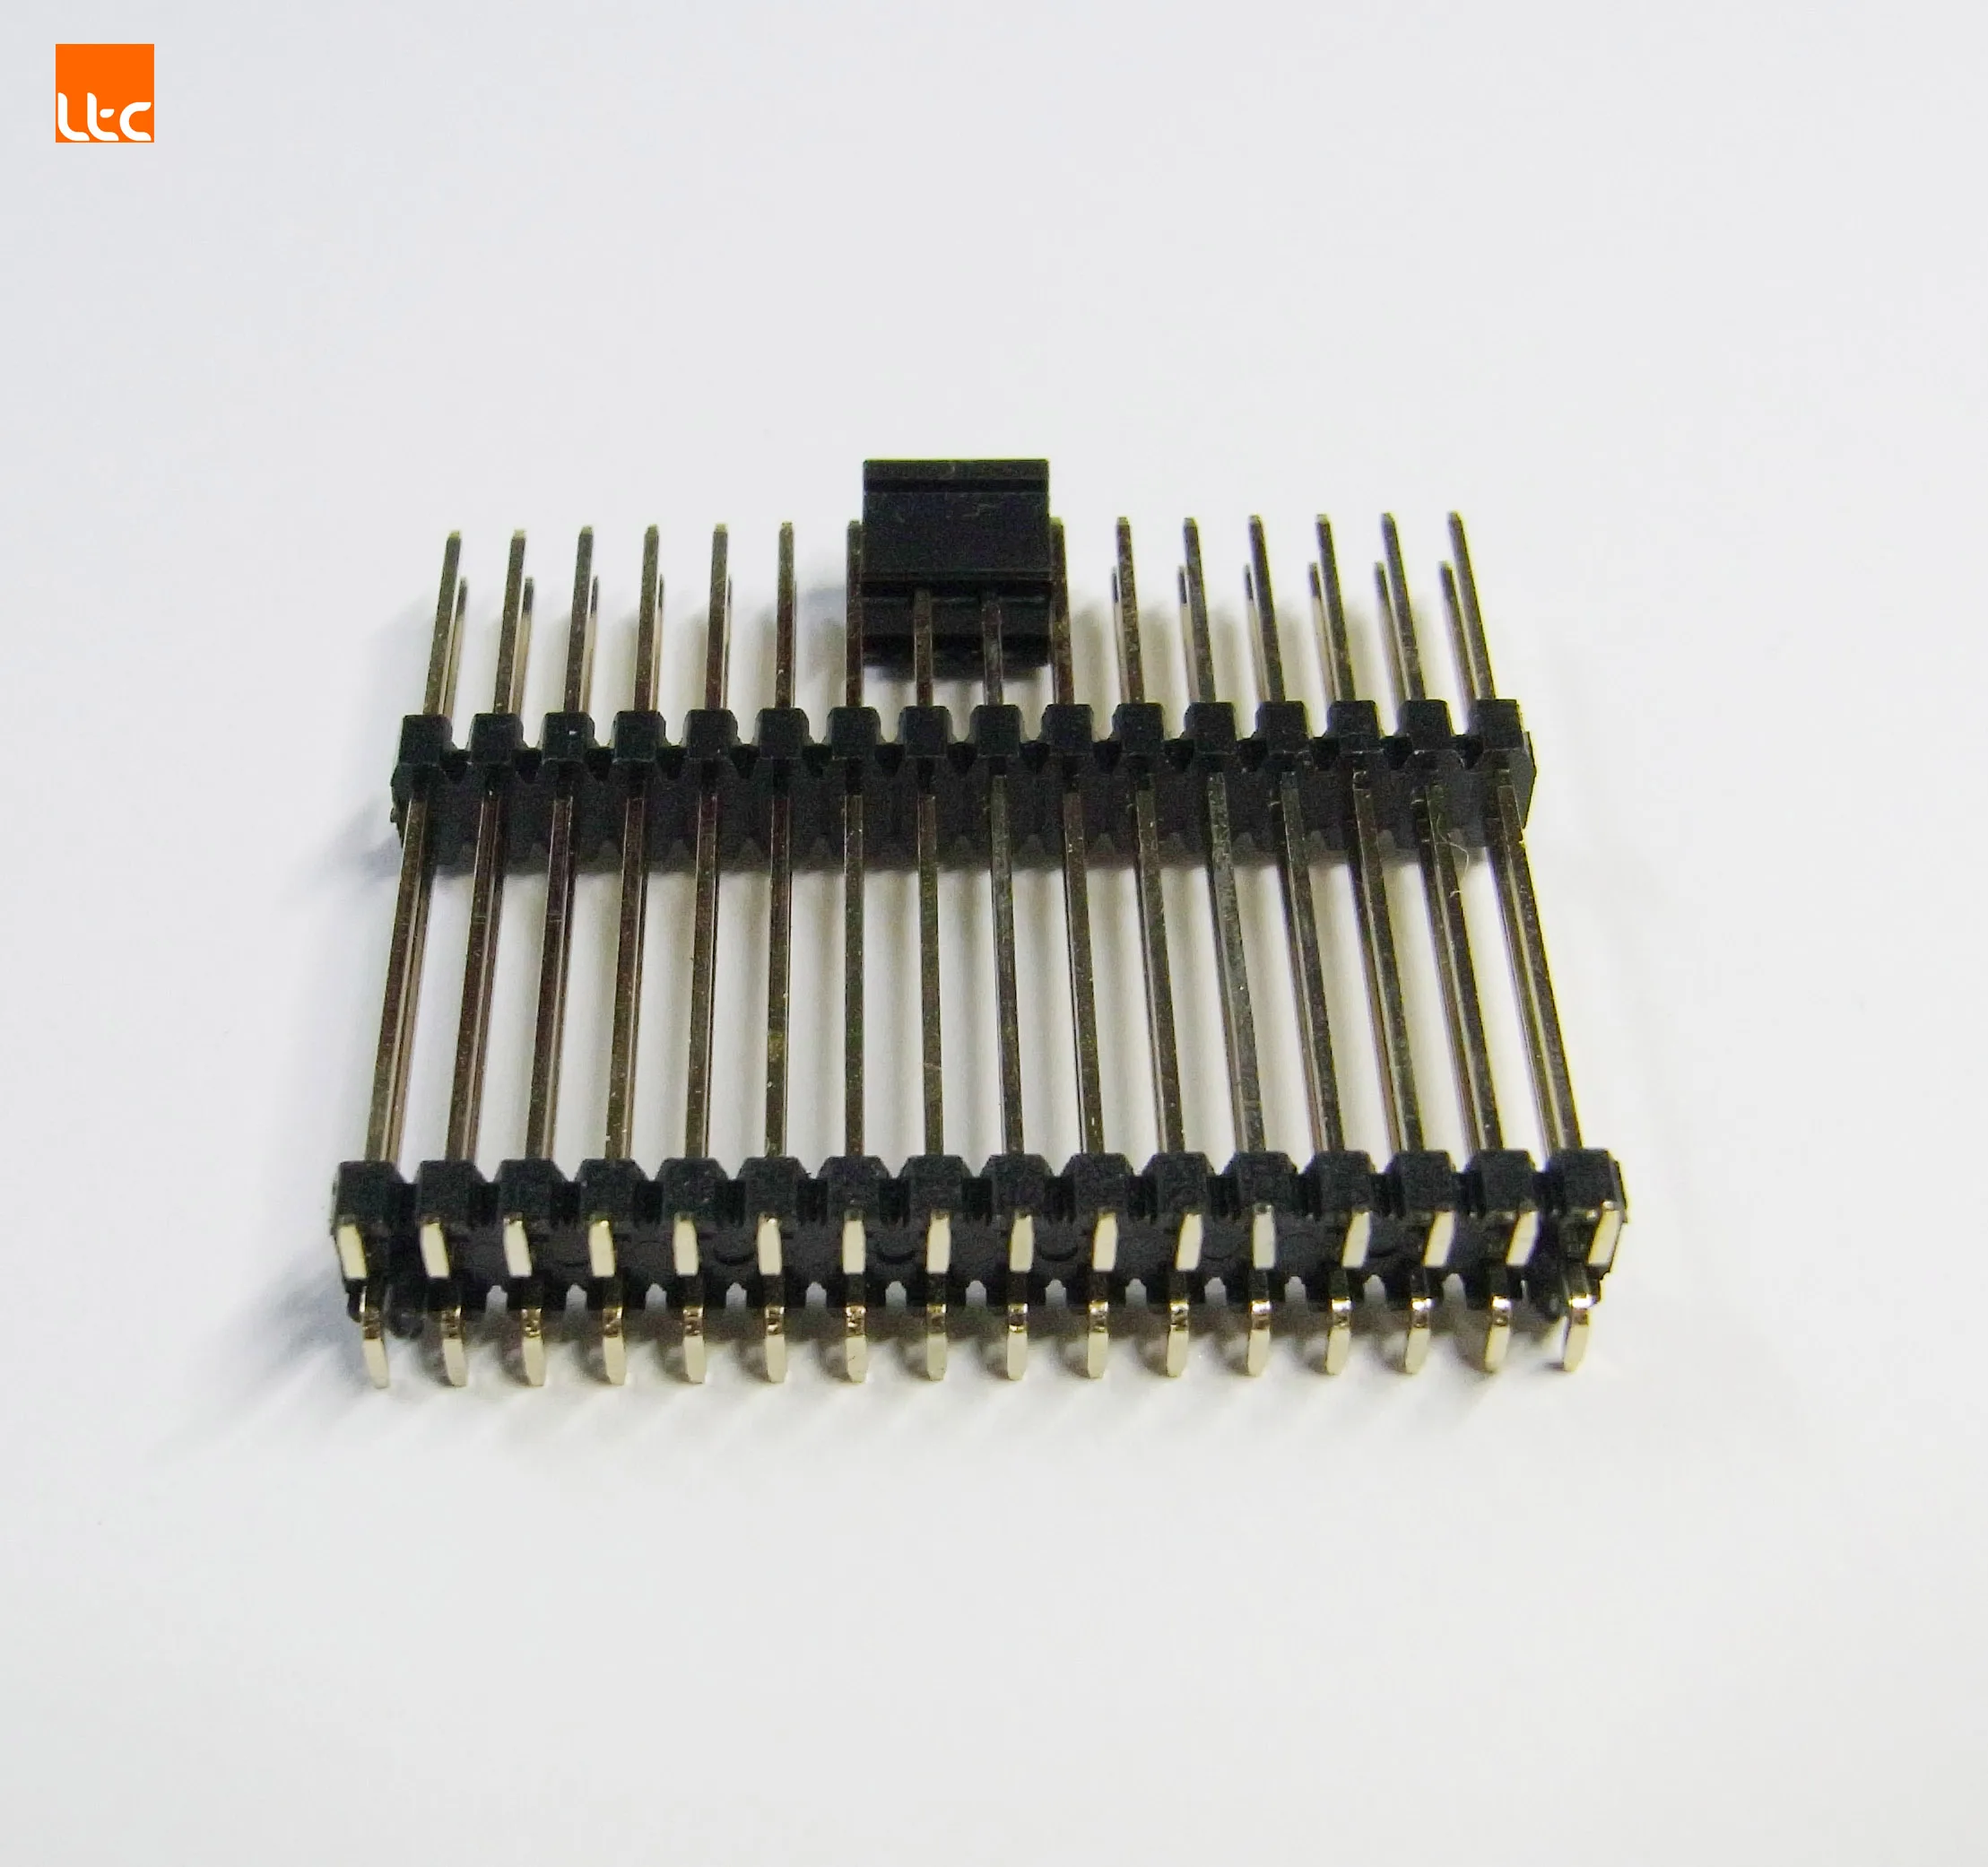 Hot sale high insulator profile 2.0 mm pitch OEM double layer male pin header connector